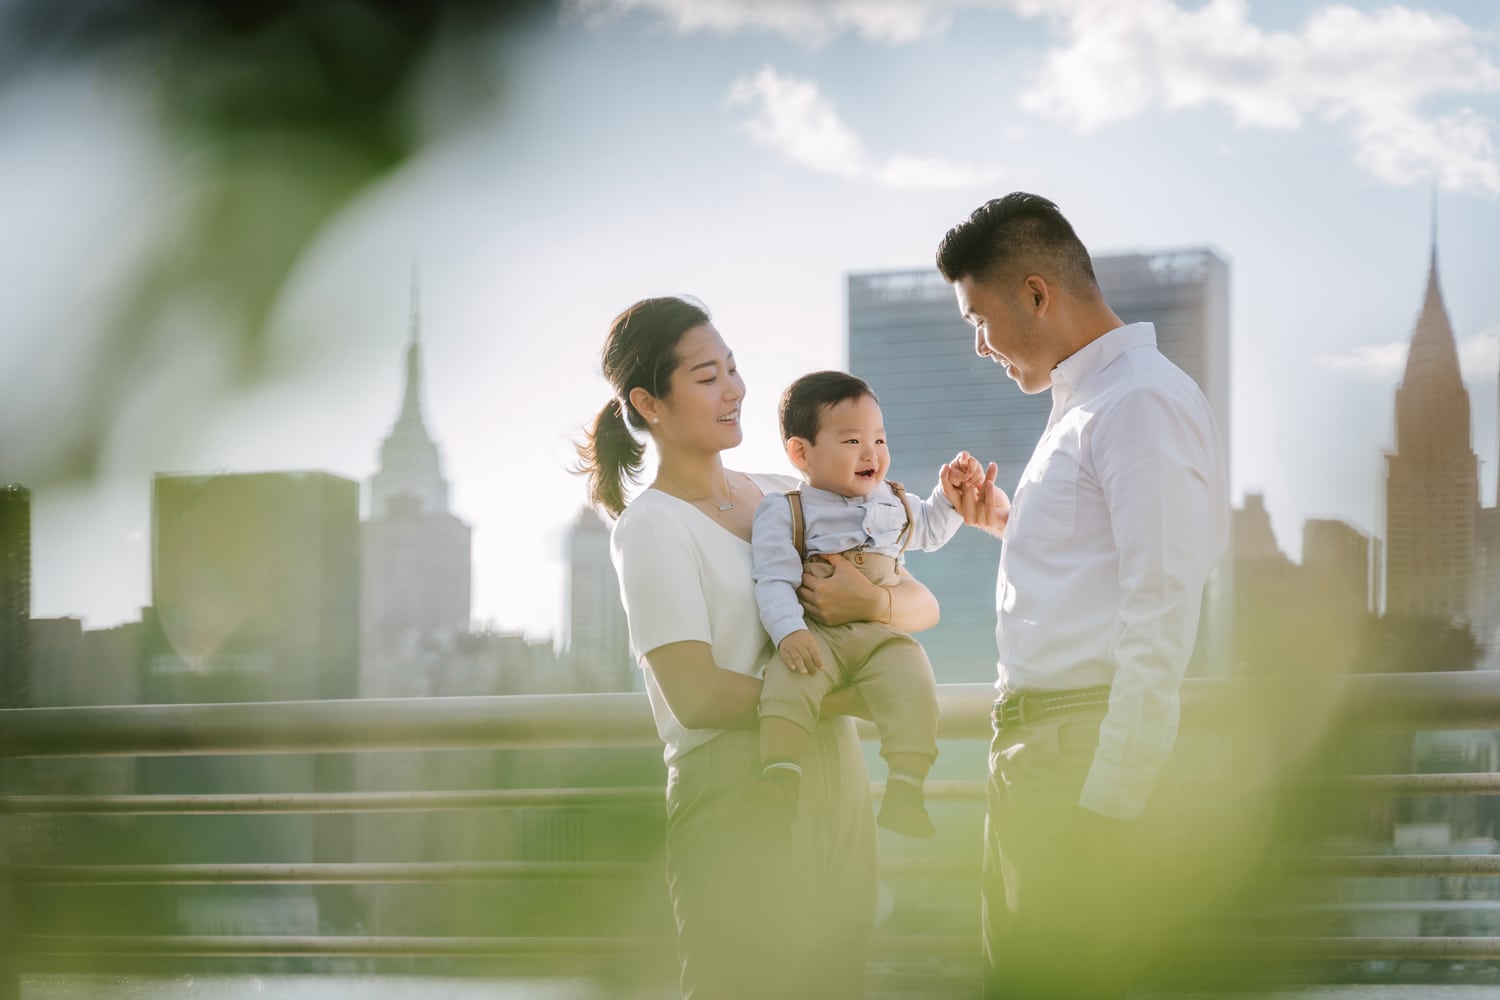 Family photosession at Gantry Plaza State Park with the Empire State Building in the background